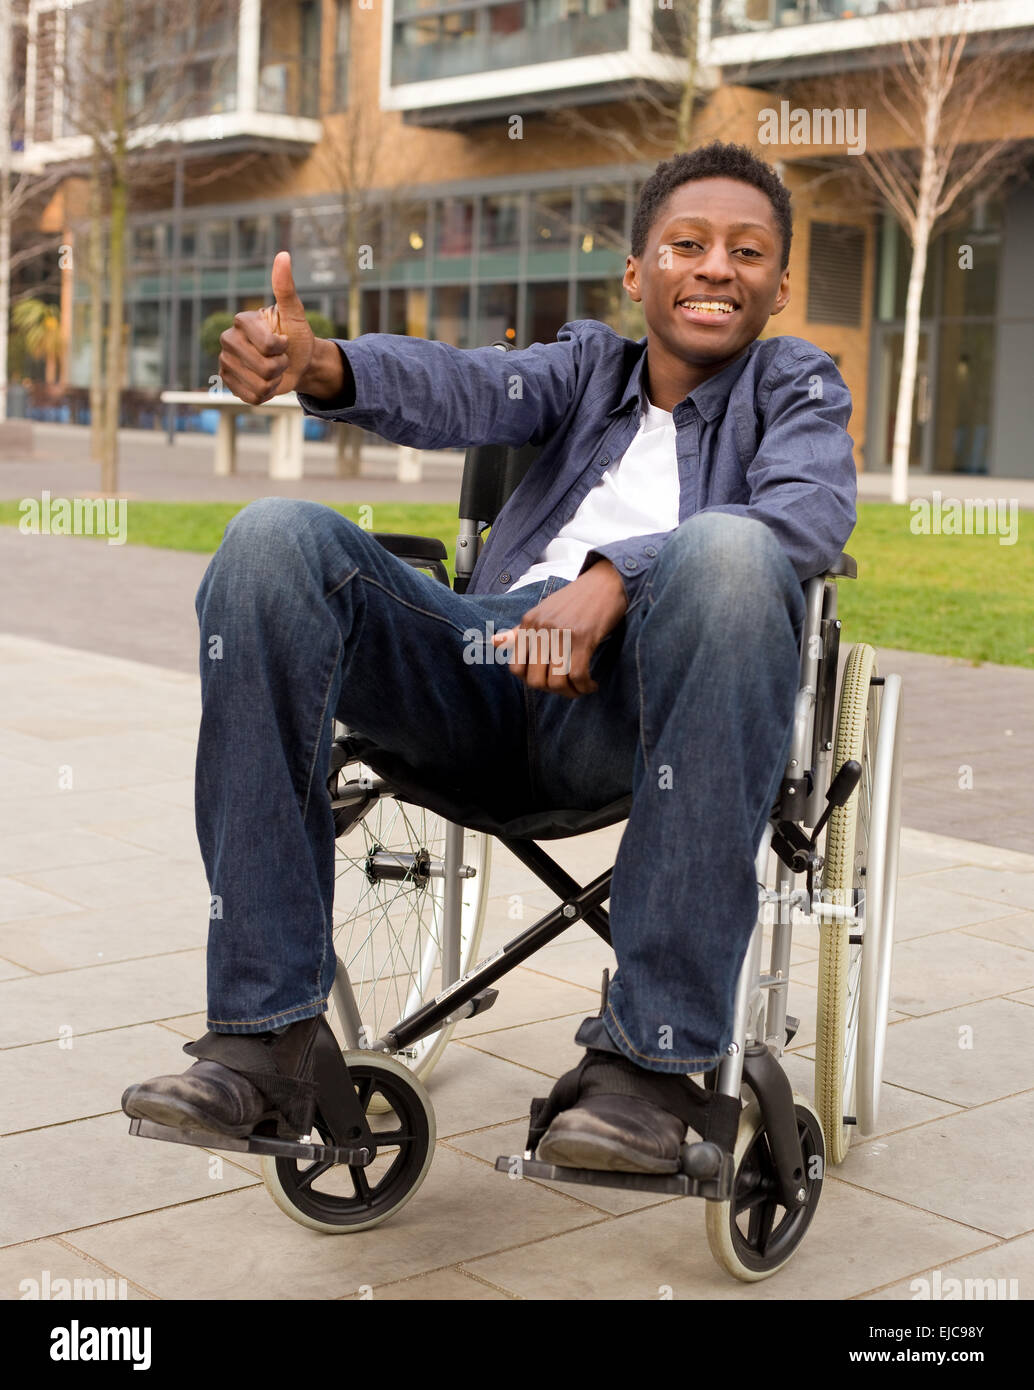 young wheelchair user showing the thumbs up symbol Stock Photo